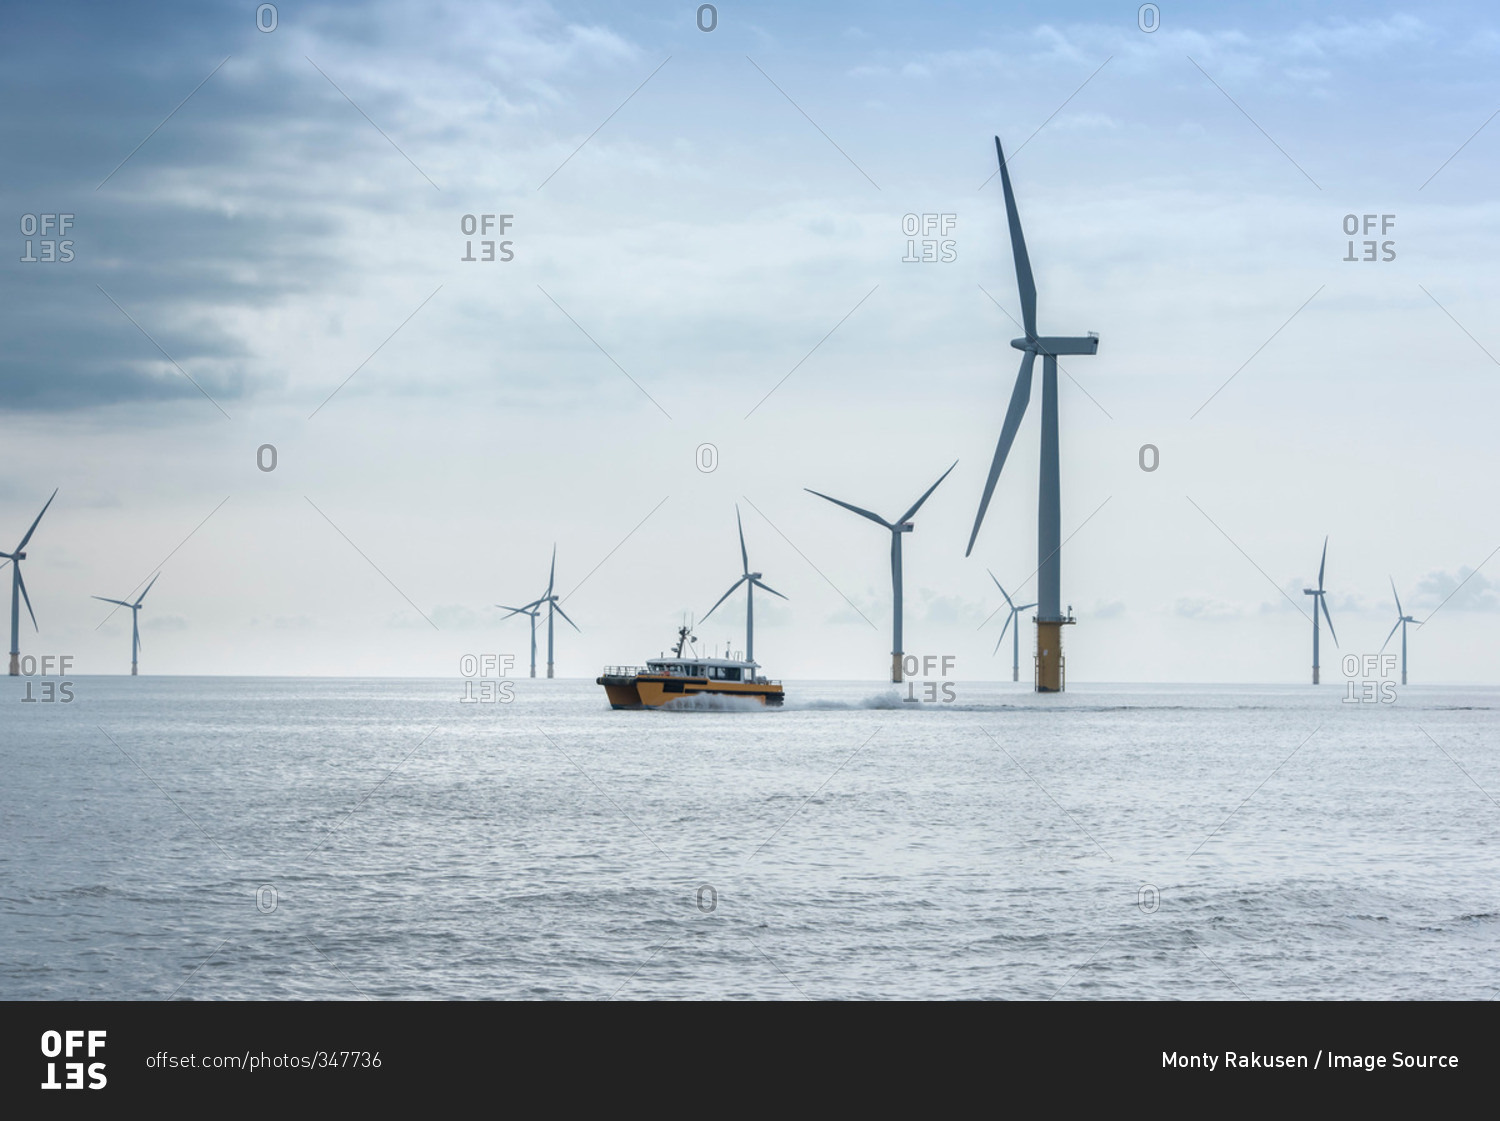 View of offshore windfarm and service boat